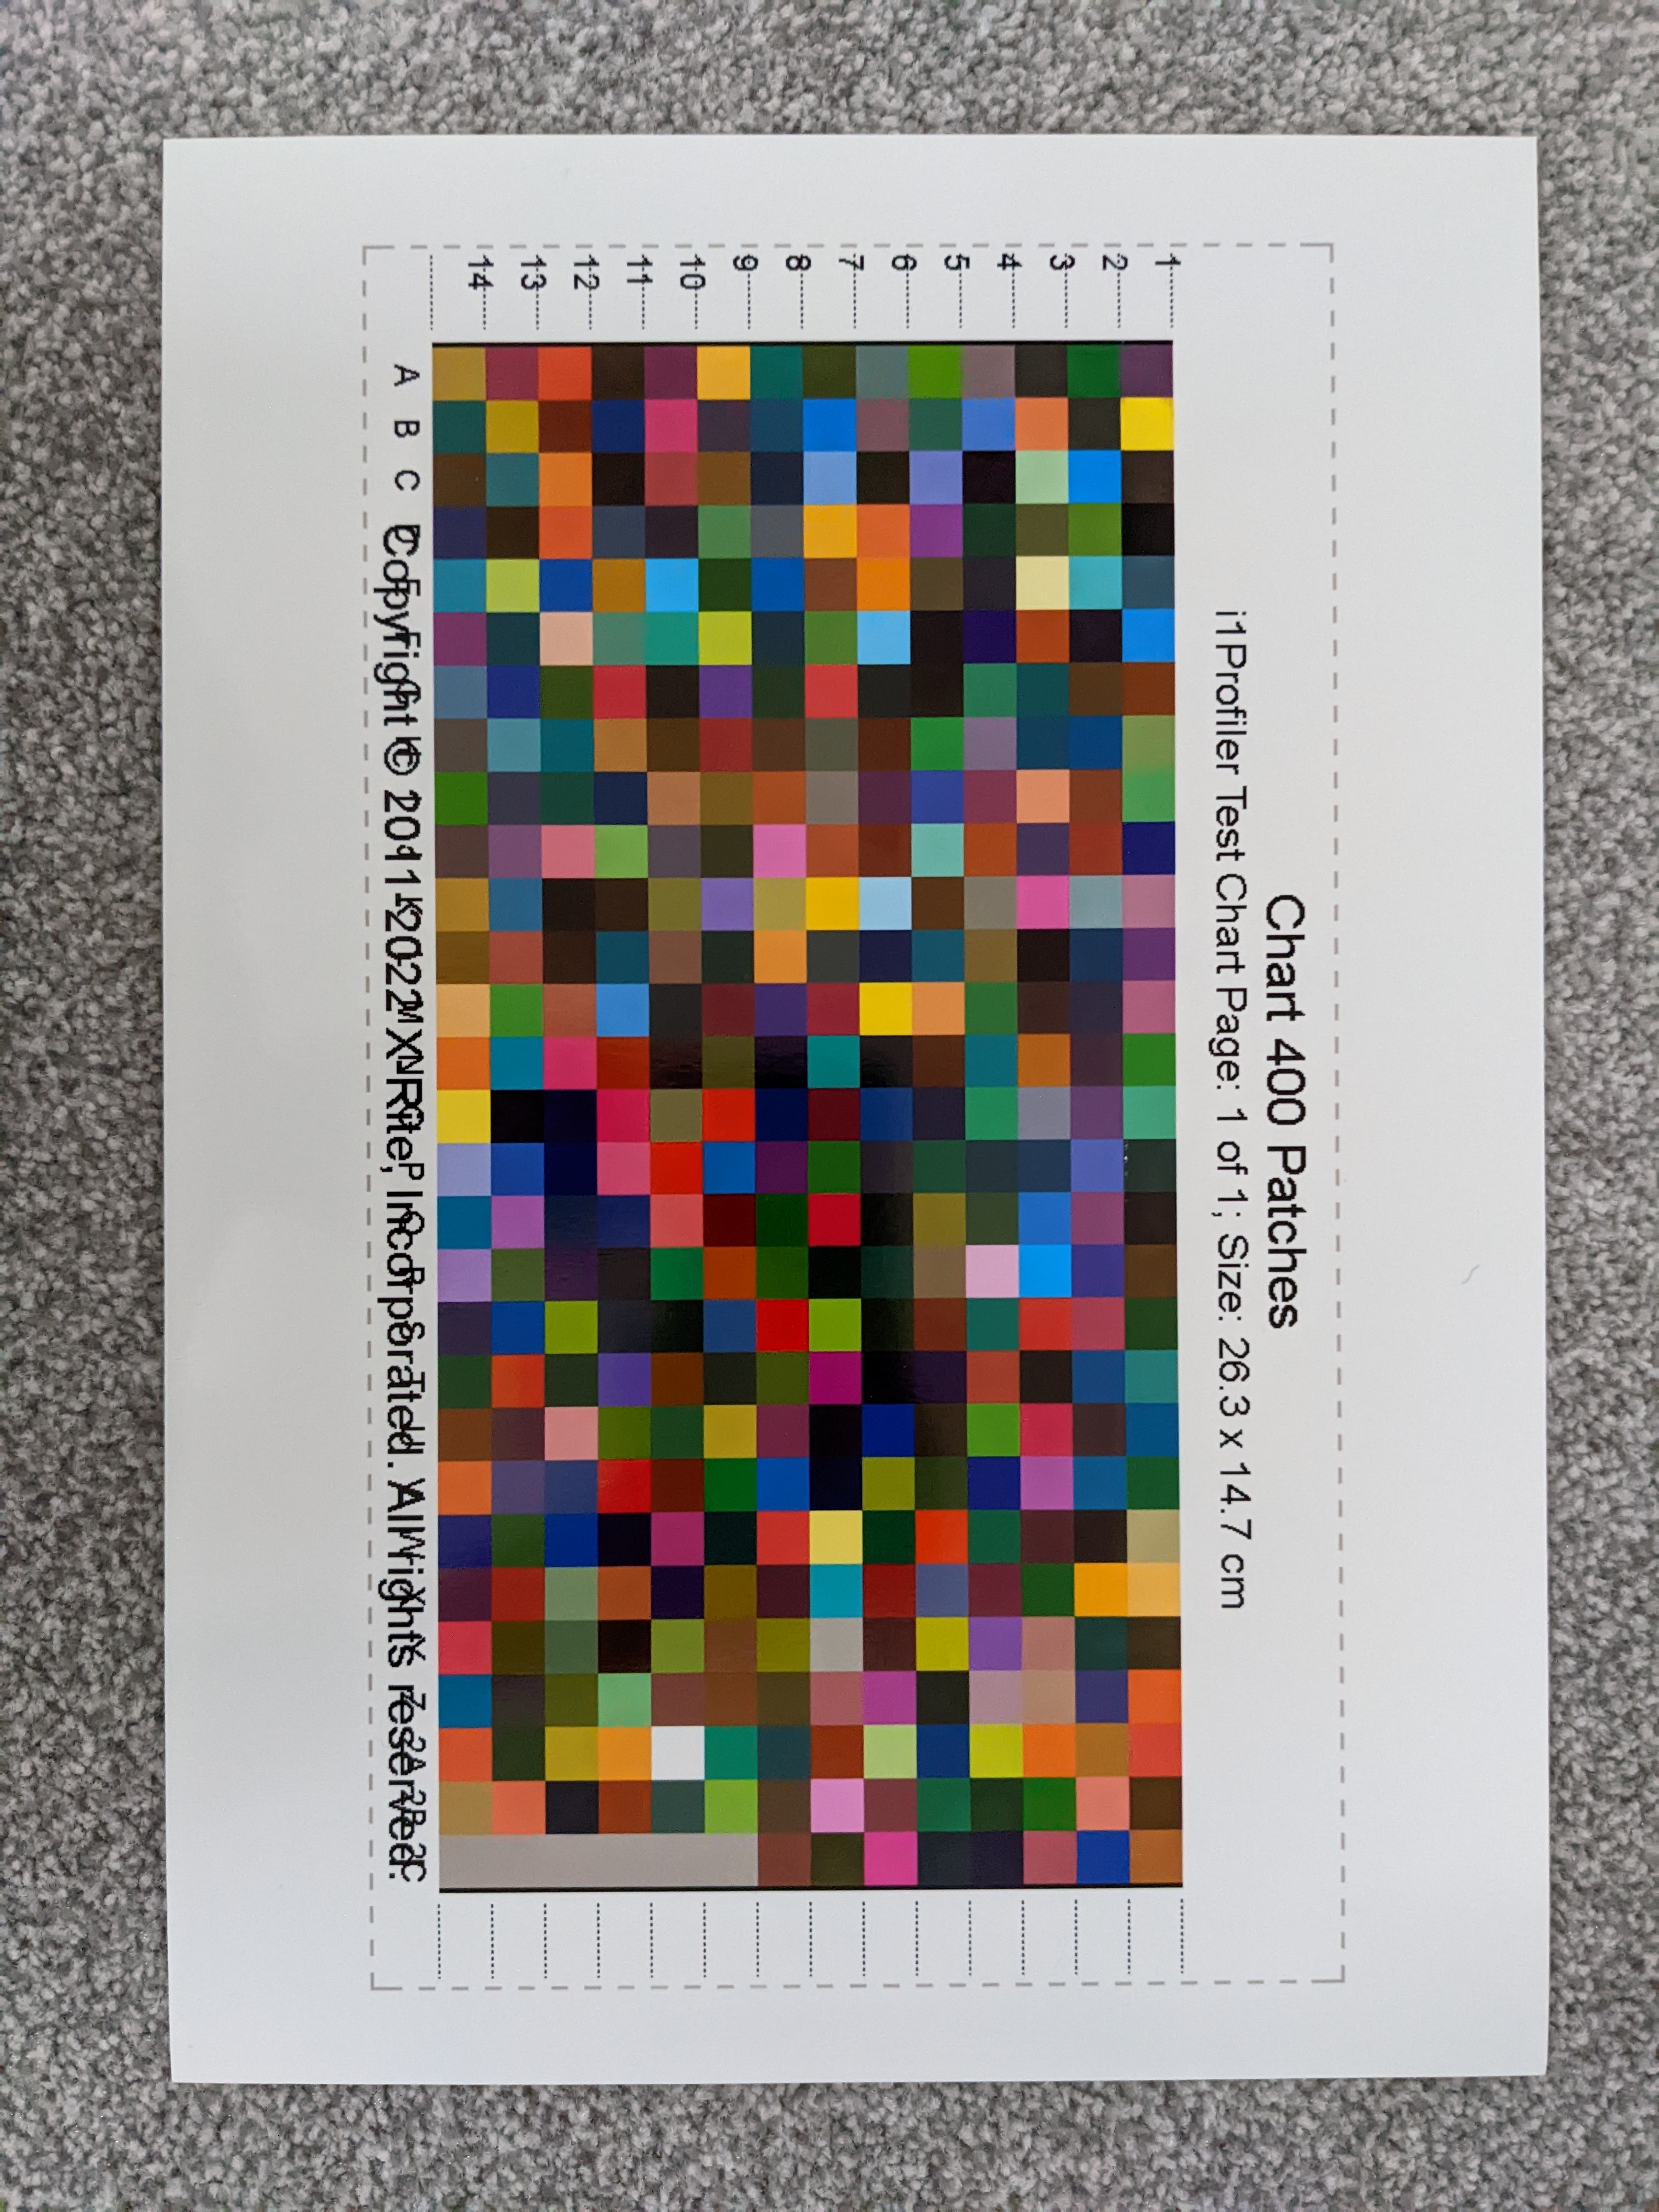 An A4 colour chart printed by i1Profiler with incorrectly scaled text